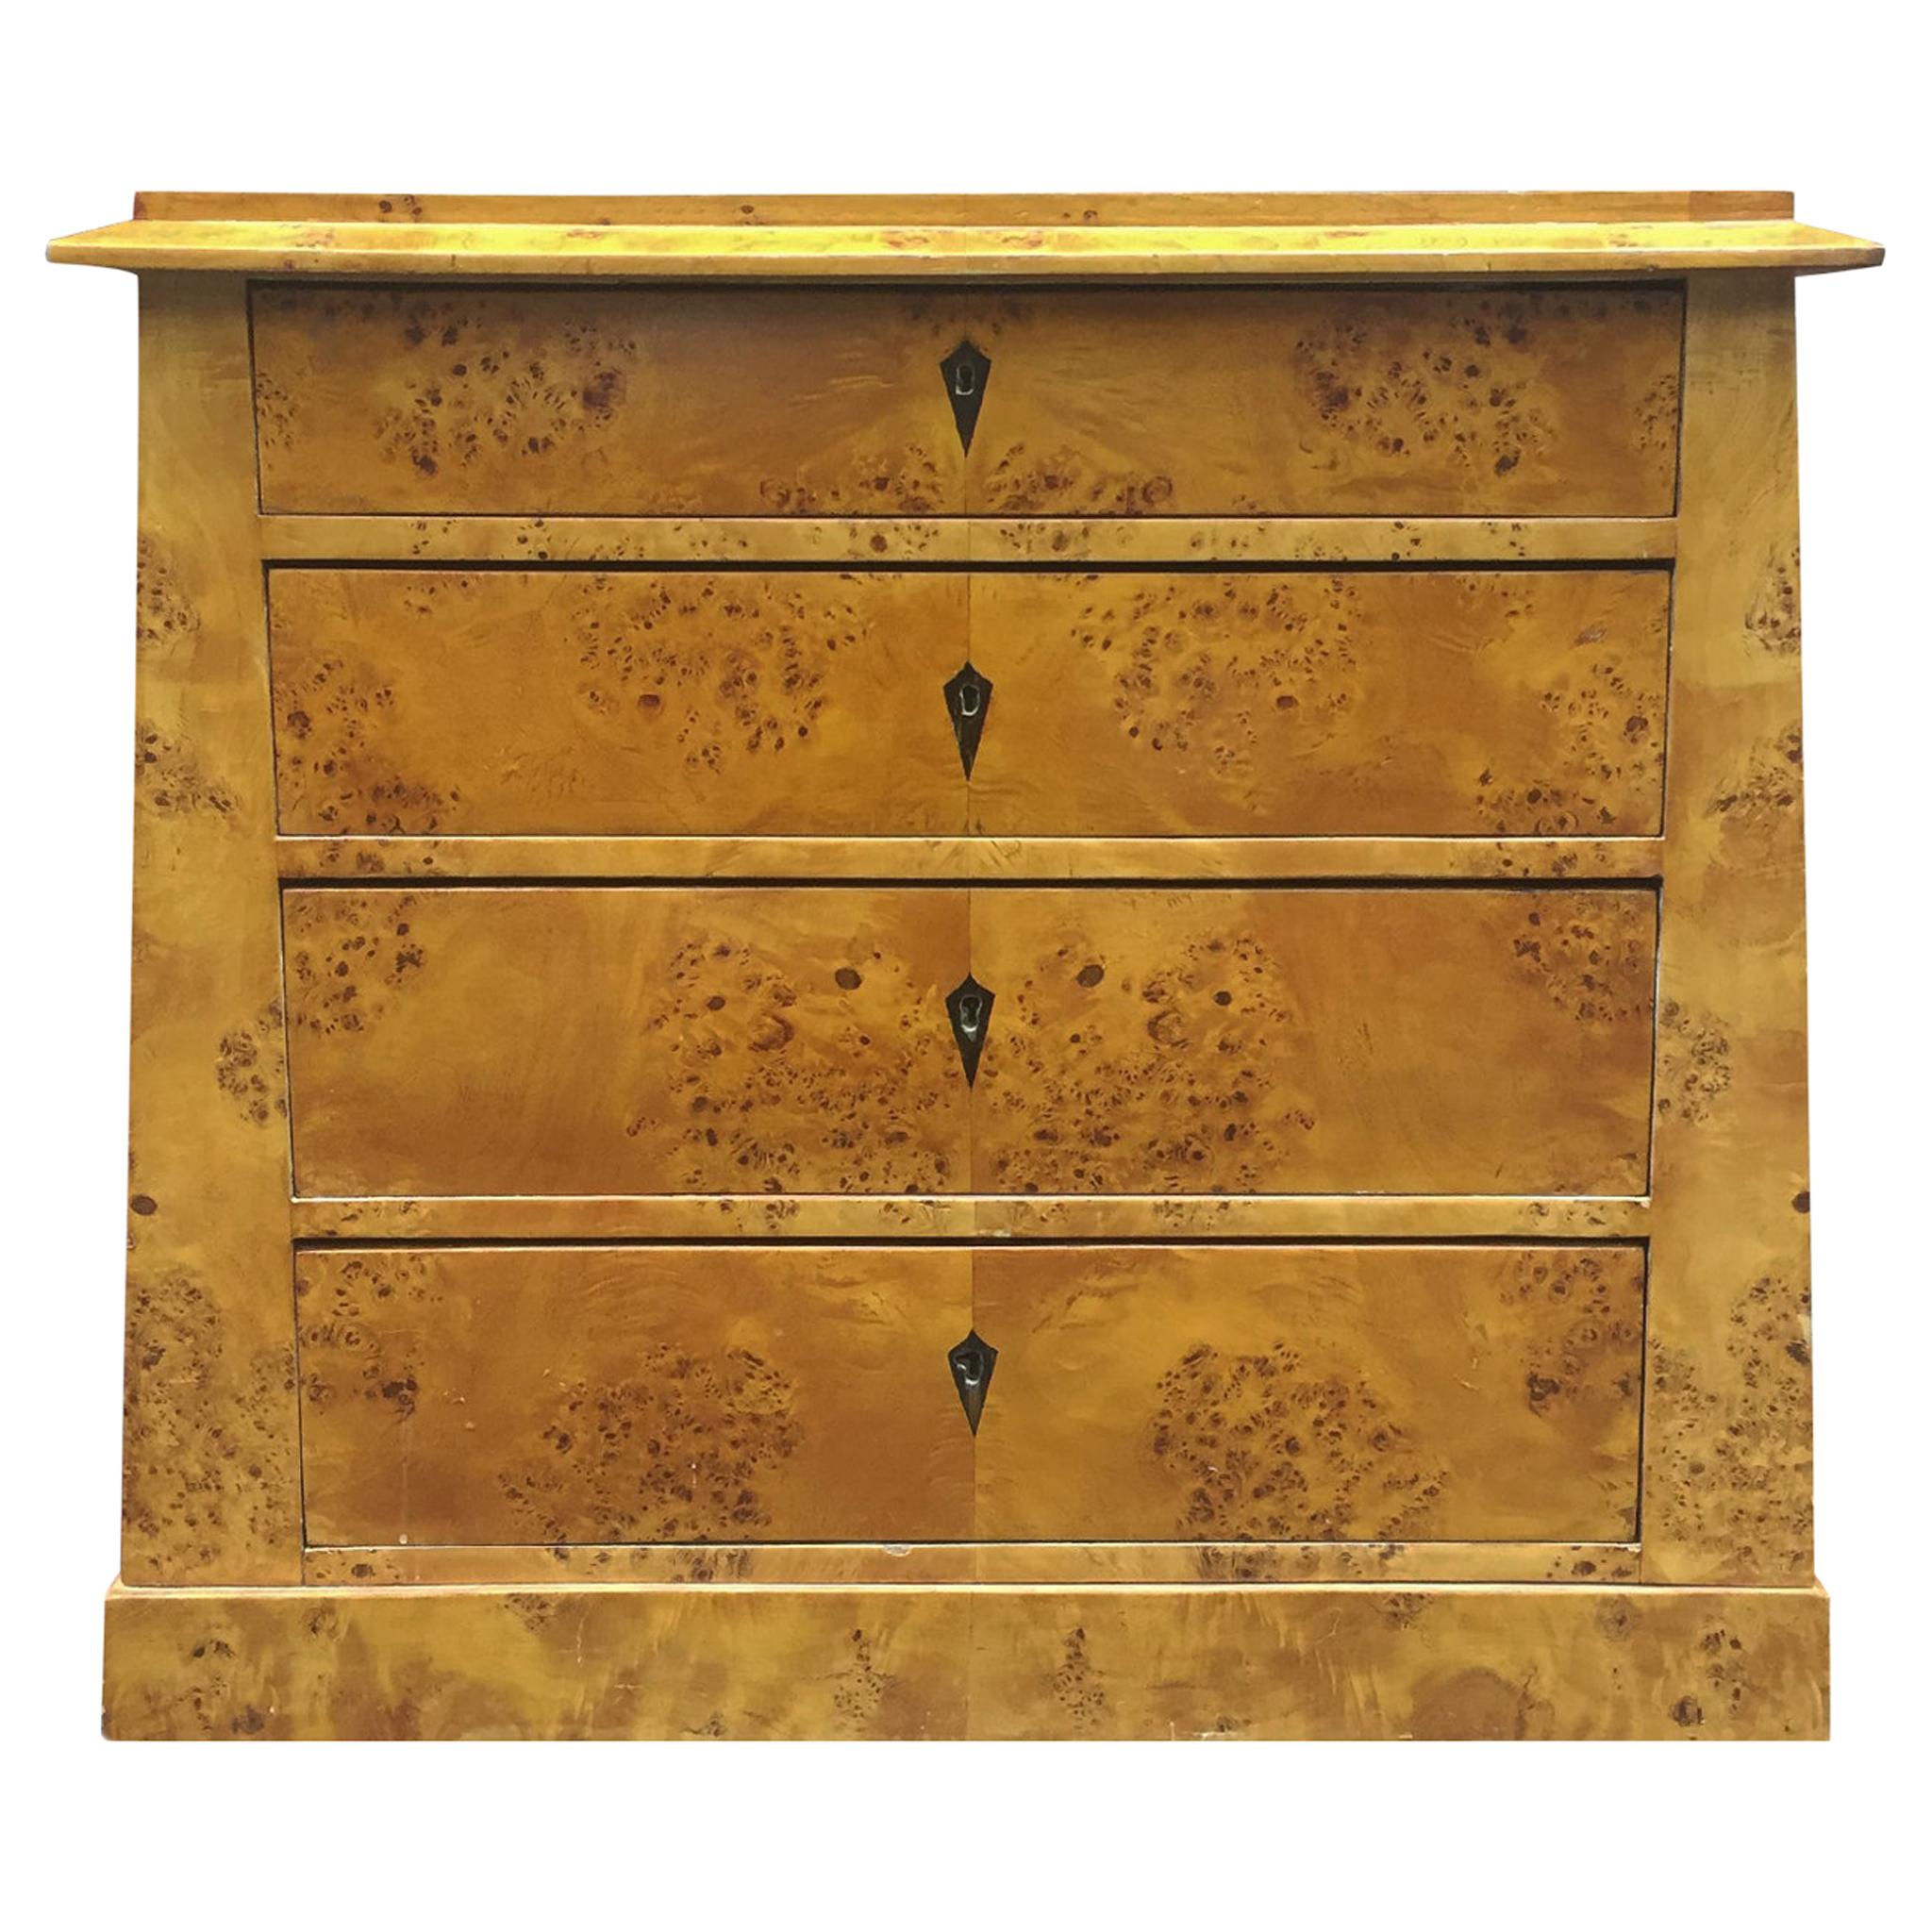 19th Century Biedermeier Burl Chest of Drawers or Commode